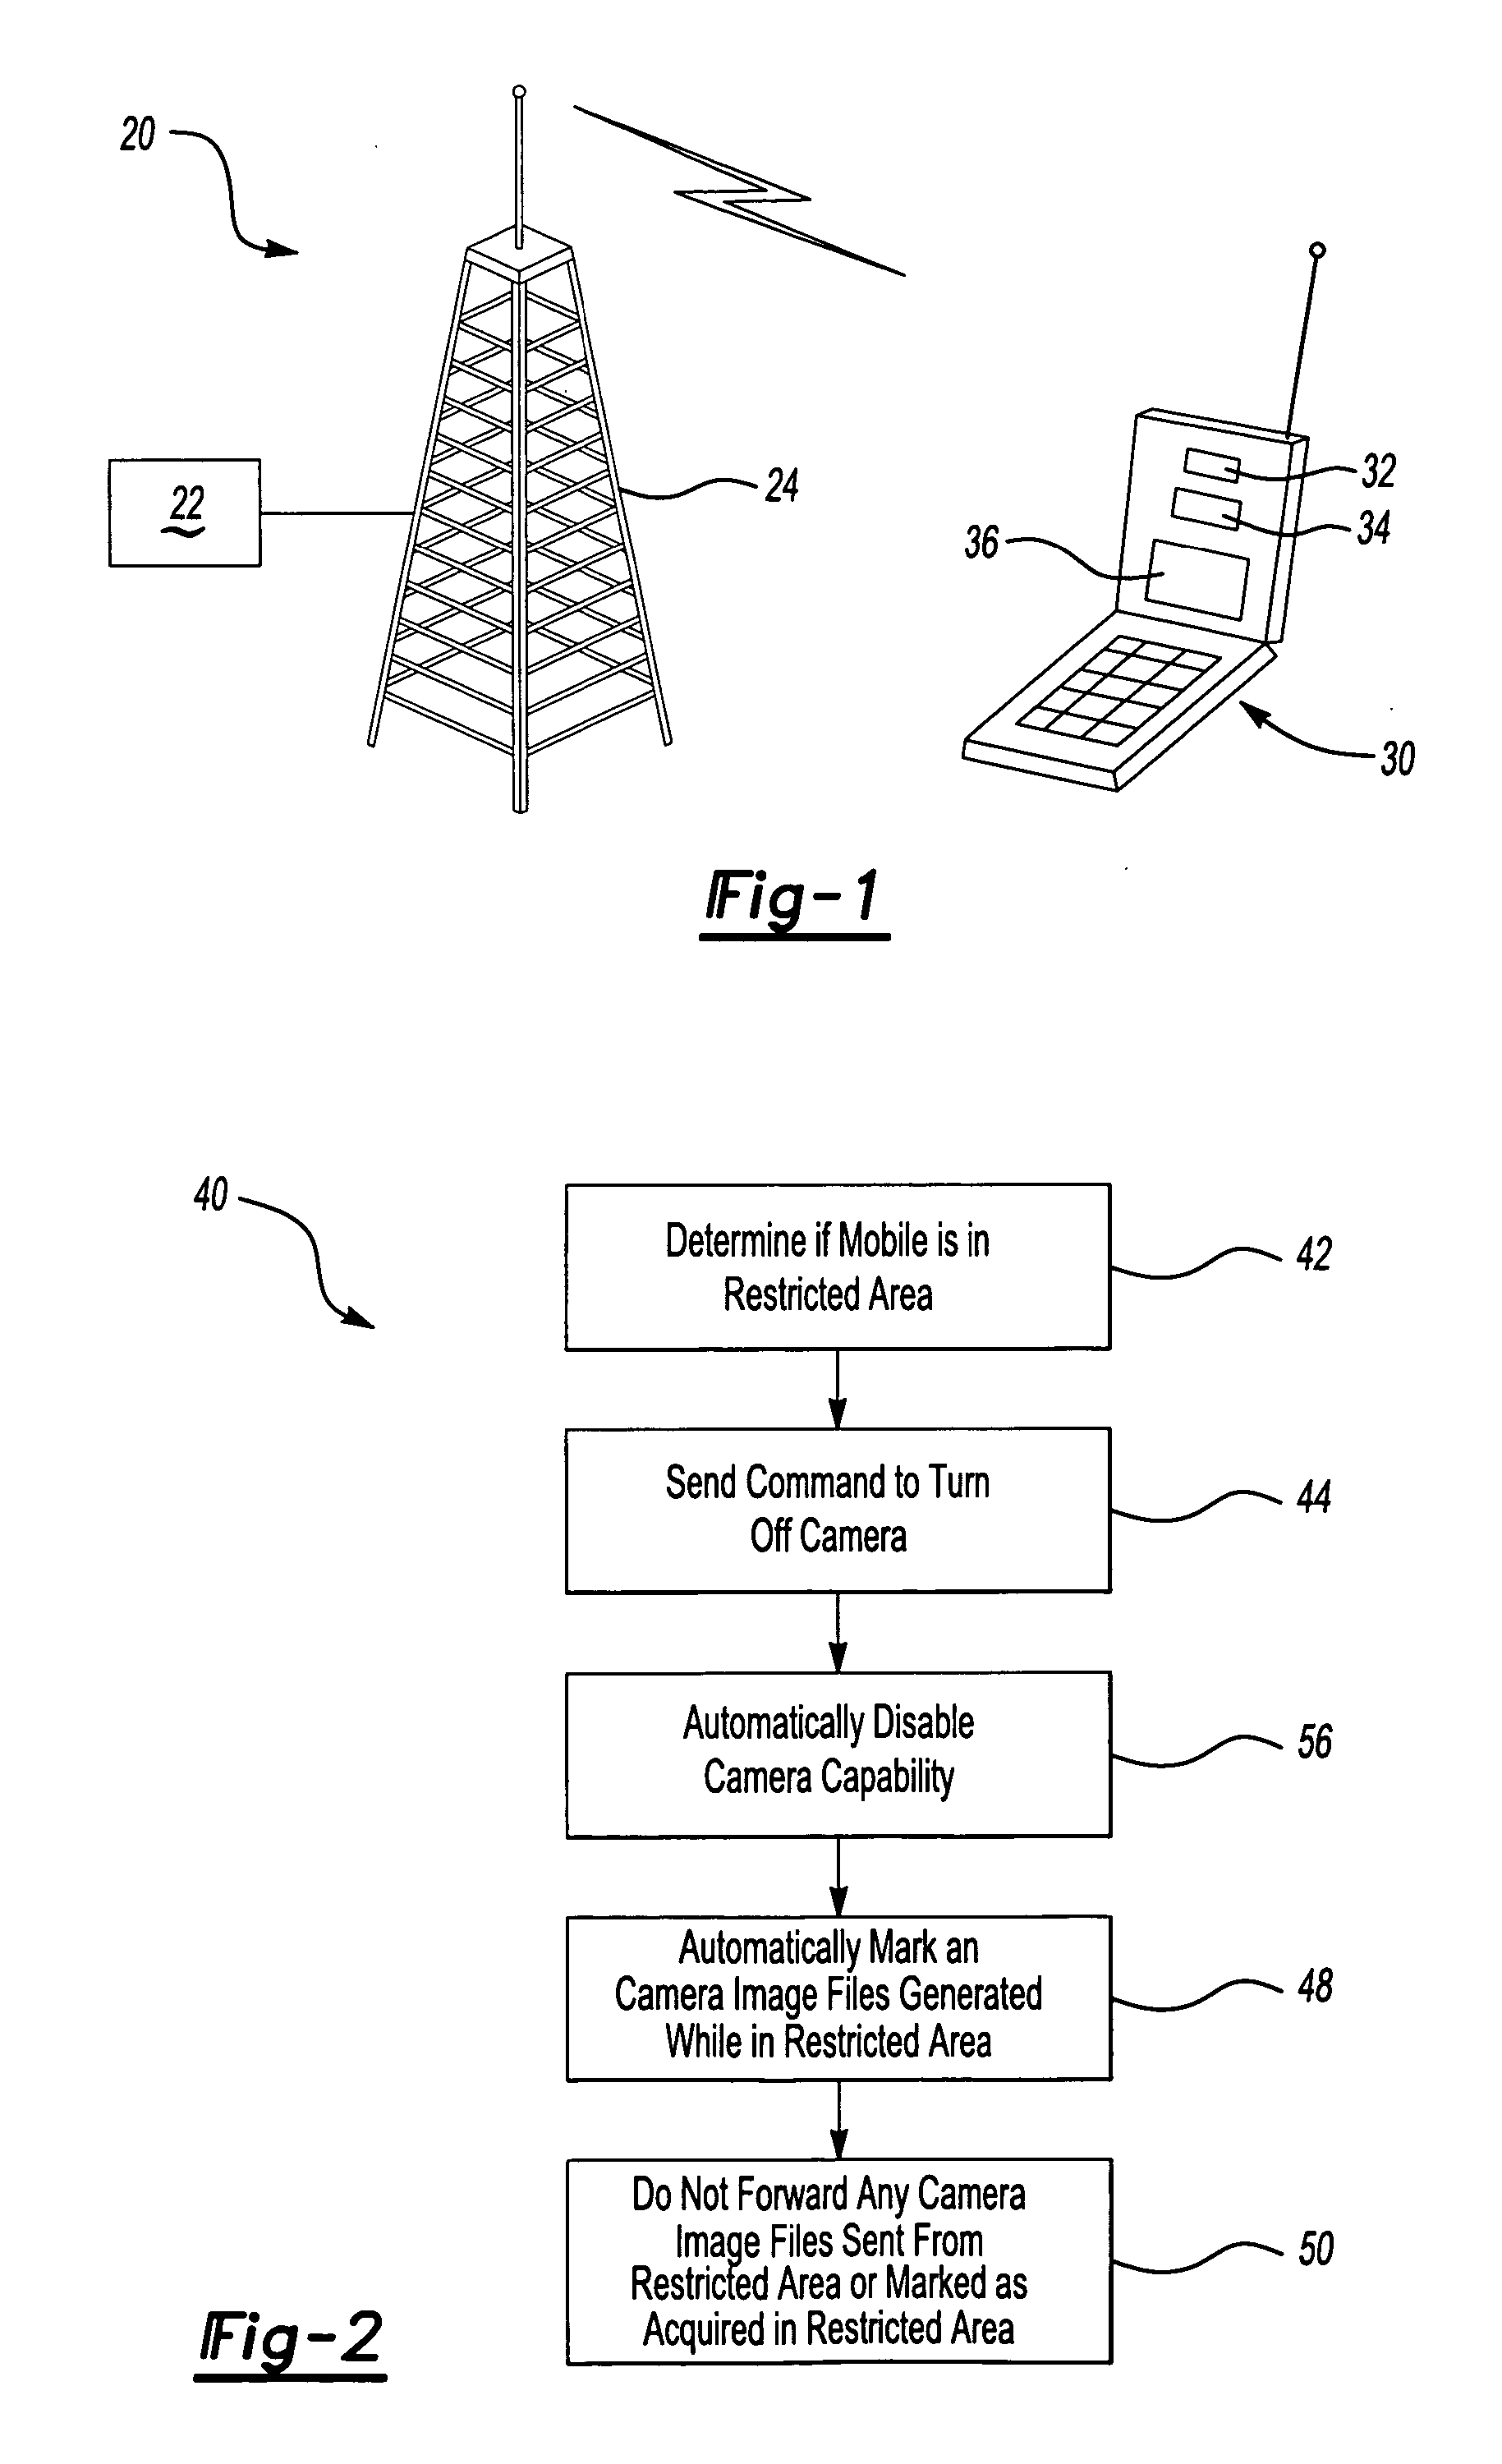 Controlling wireless communication devices with media recording capabilities